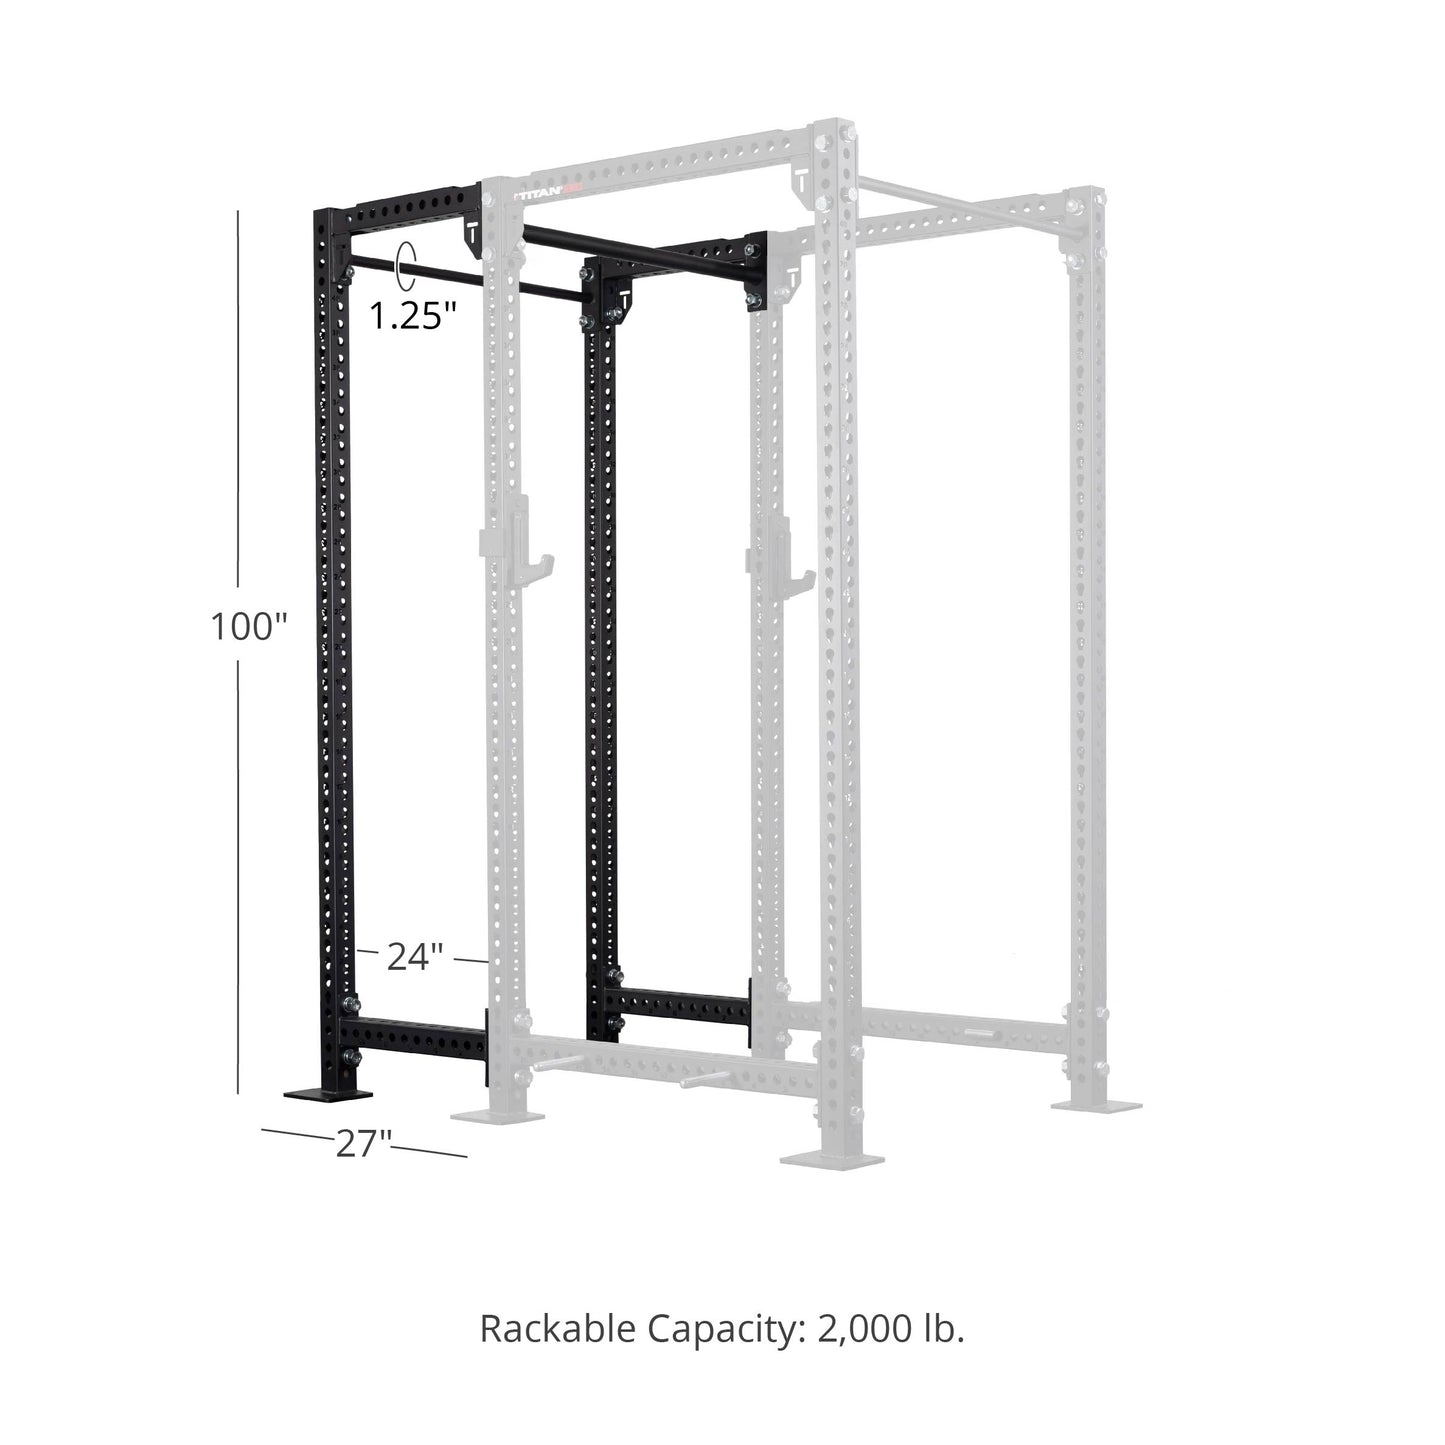 TITAN Series 24" Extension Kit - Extension Color: Black - Extension Height: 100" - Crossmember: 1.25" Pull-Up Bar | Black / 100" / 1.25" Pull-Up Bar - view 28